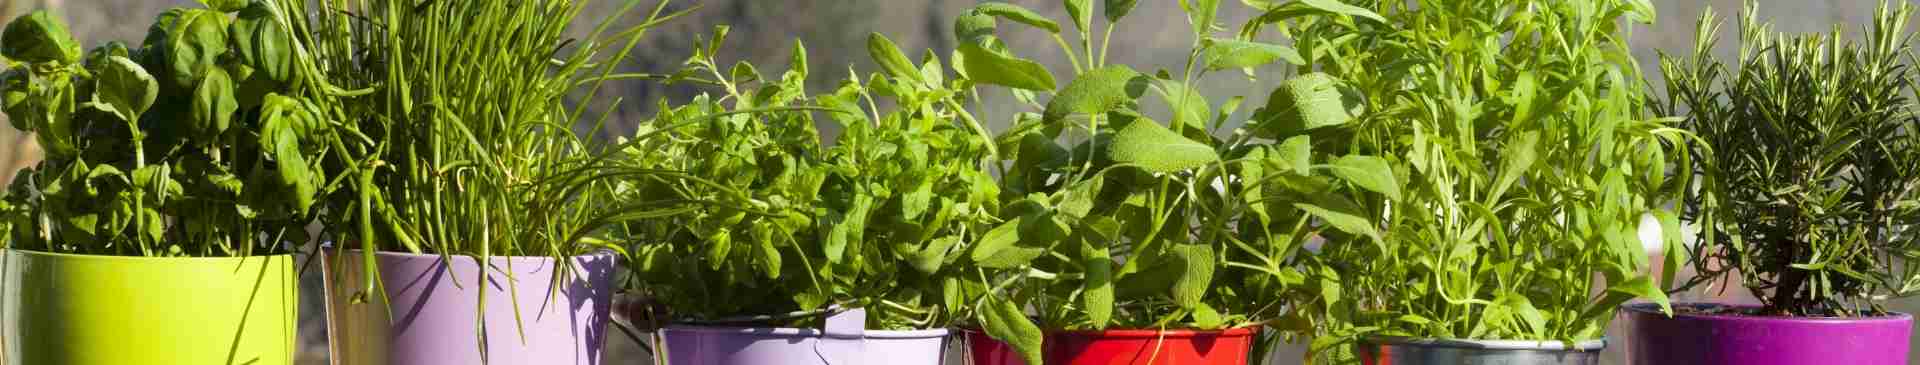 5 Simple Tips to Grow Herbs in Containers